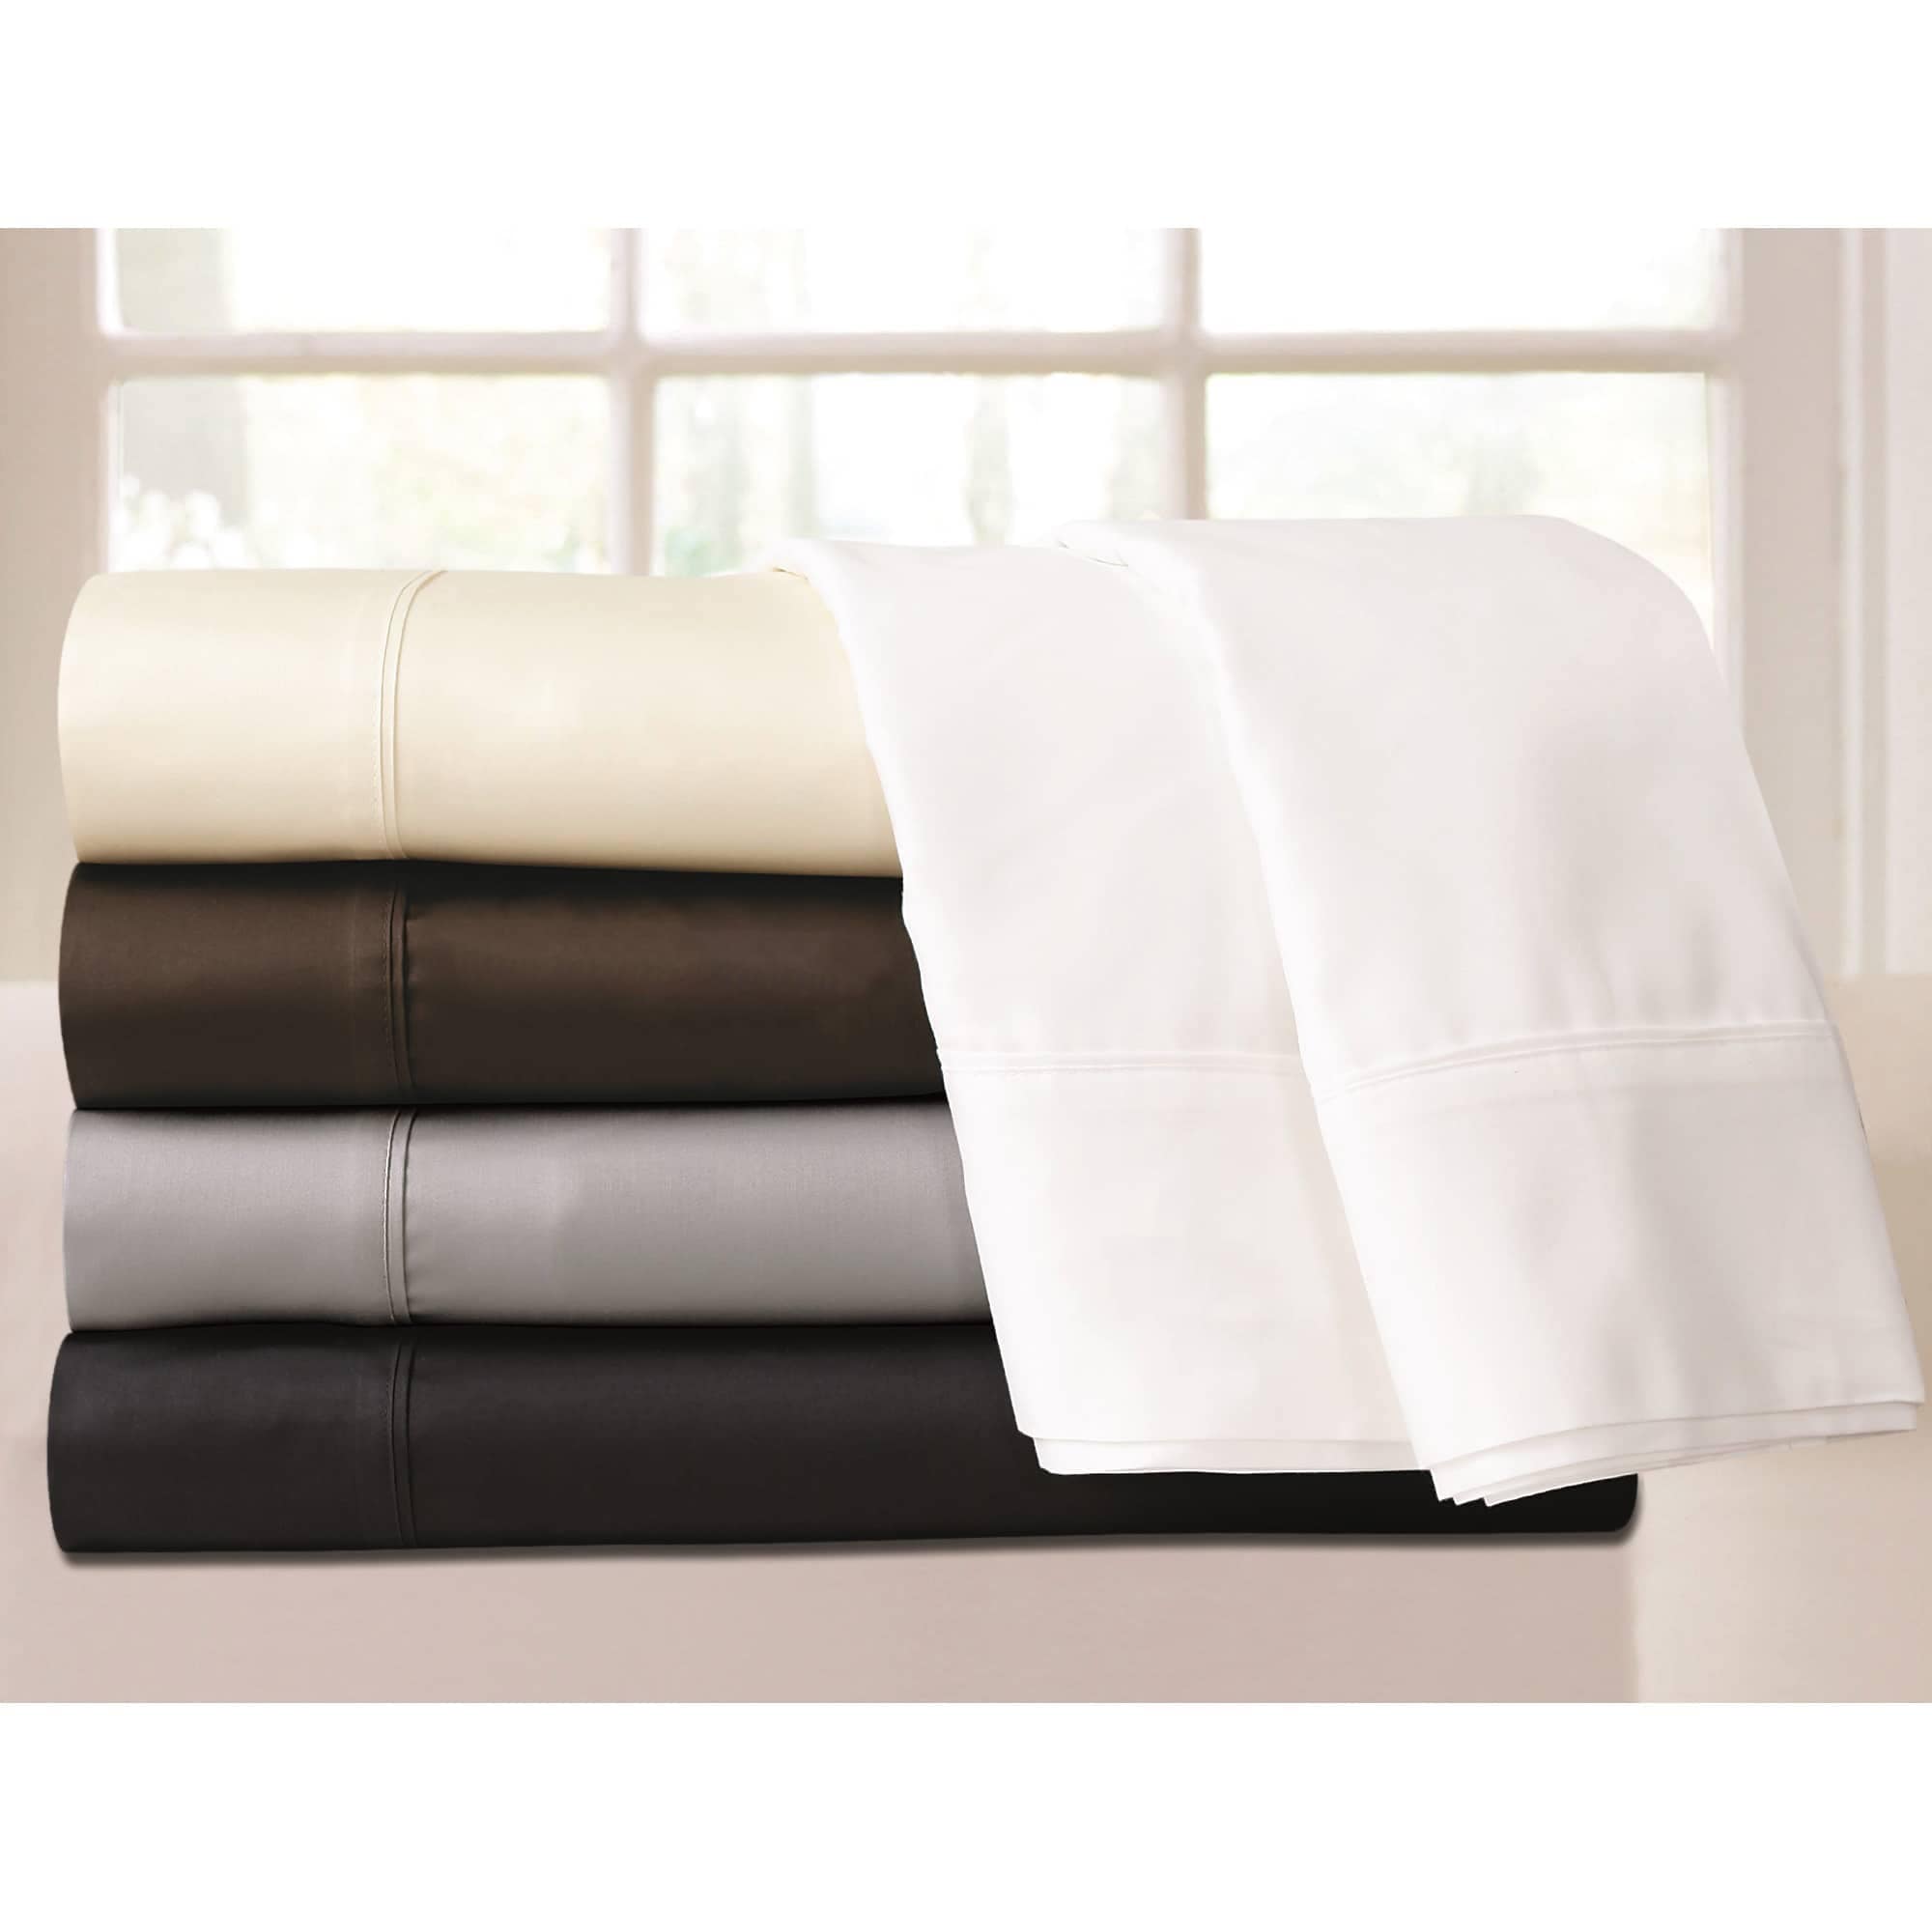 Super Deep Pocket 6 PC Sheet Set 1000tc Egyptian Cotton Queen Size!Made In India 